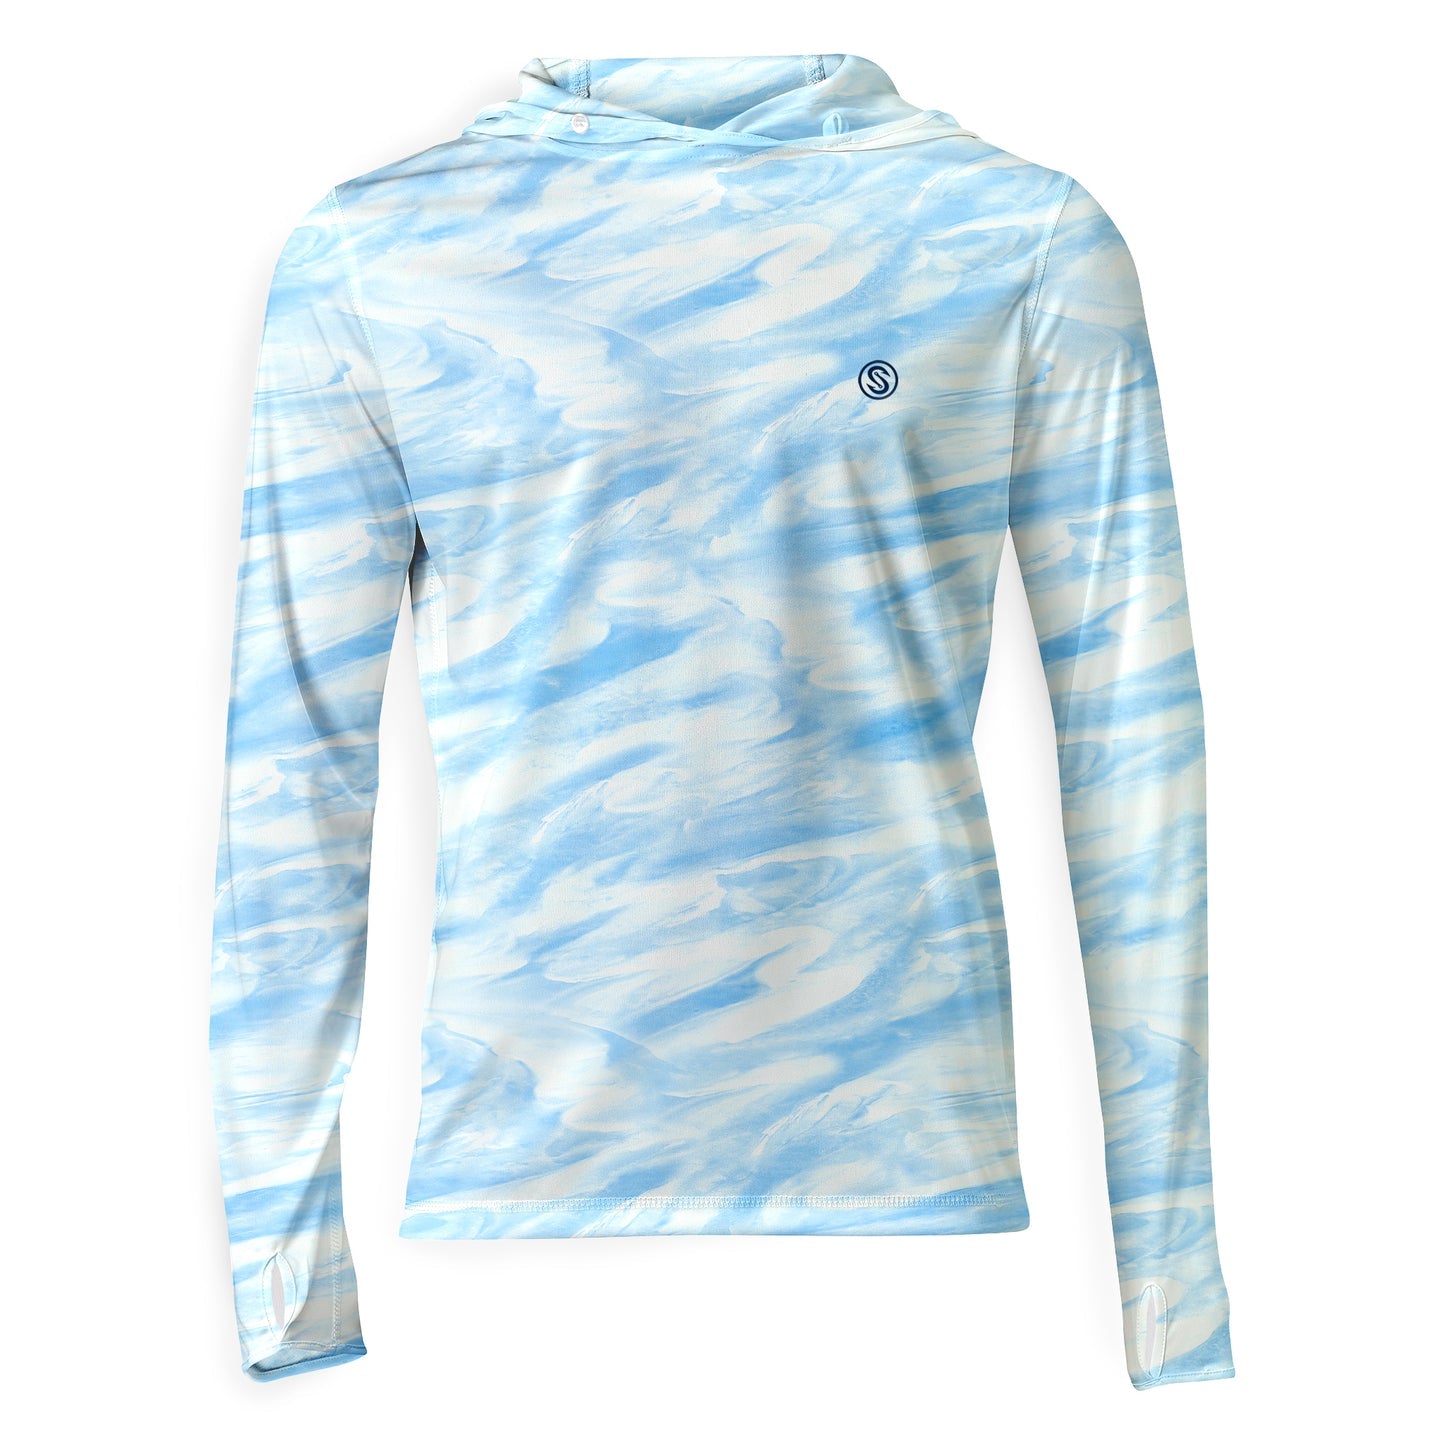 SCALES Bahamas Current Hooded Long Sleeve Performance Shirt